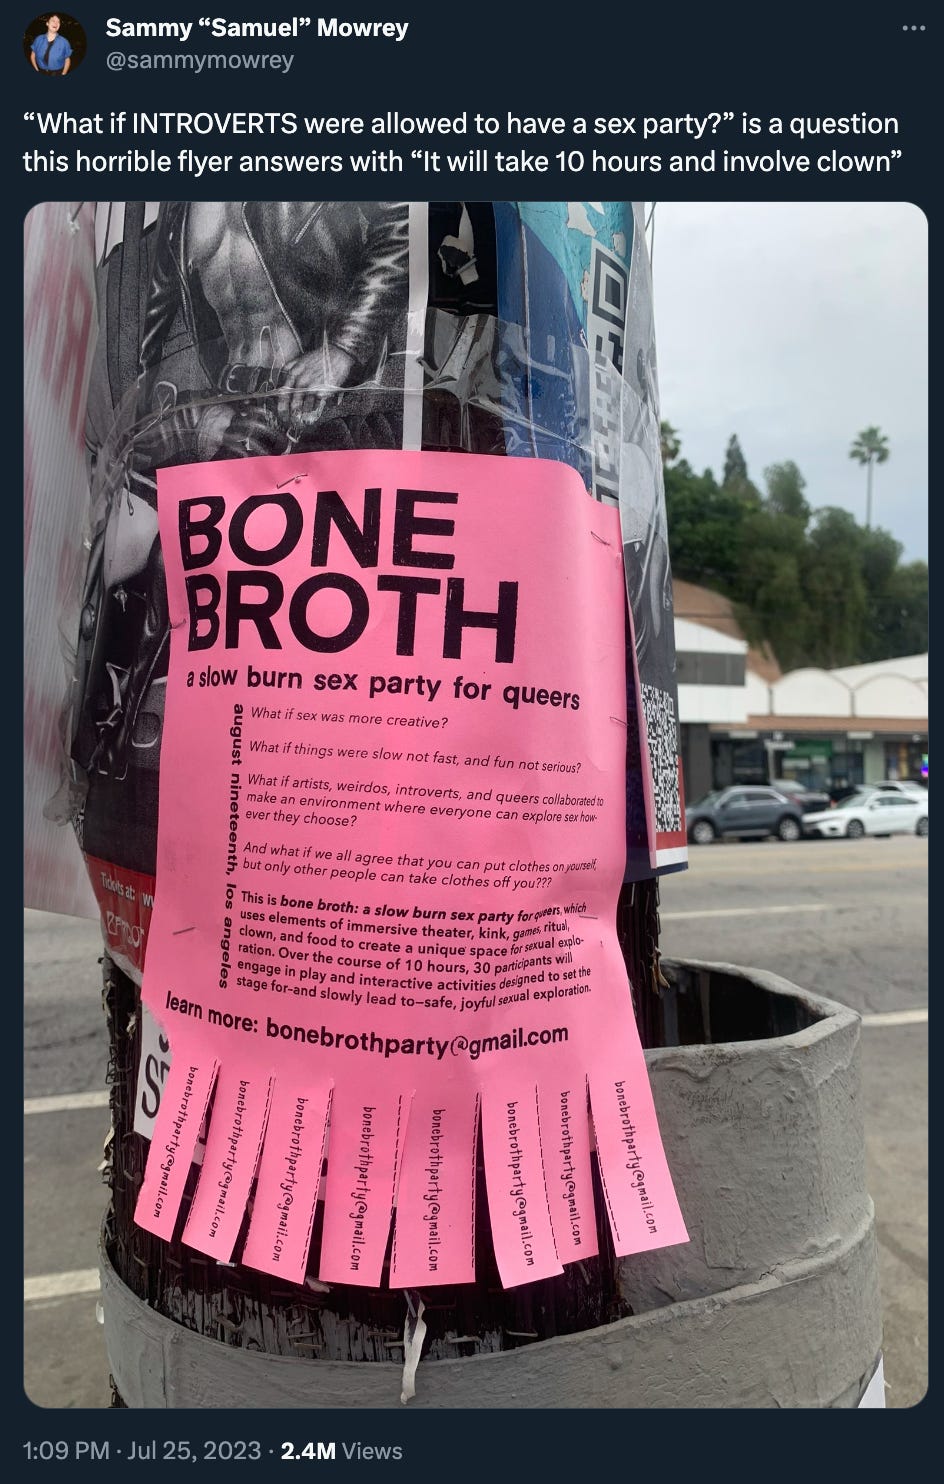 Sammy “Samuel” Mowrey Xed: “‘What if INTROVERTS were allowed to have a sex party?’ is a question this horrible flyer answers with ‘It will take 10 hours and involve clown’” above a picture of a pink flyer on a pole with the large title “BONE BROTH” and subtitle “a slow burn sex party for queers,” above some descriptive bullet points that do indeed specify it will take 10 hours and involve clowns.